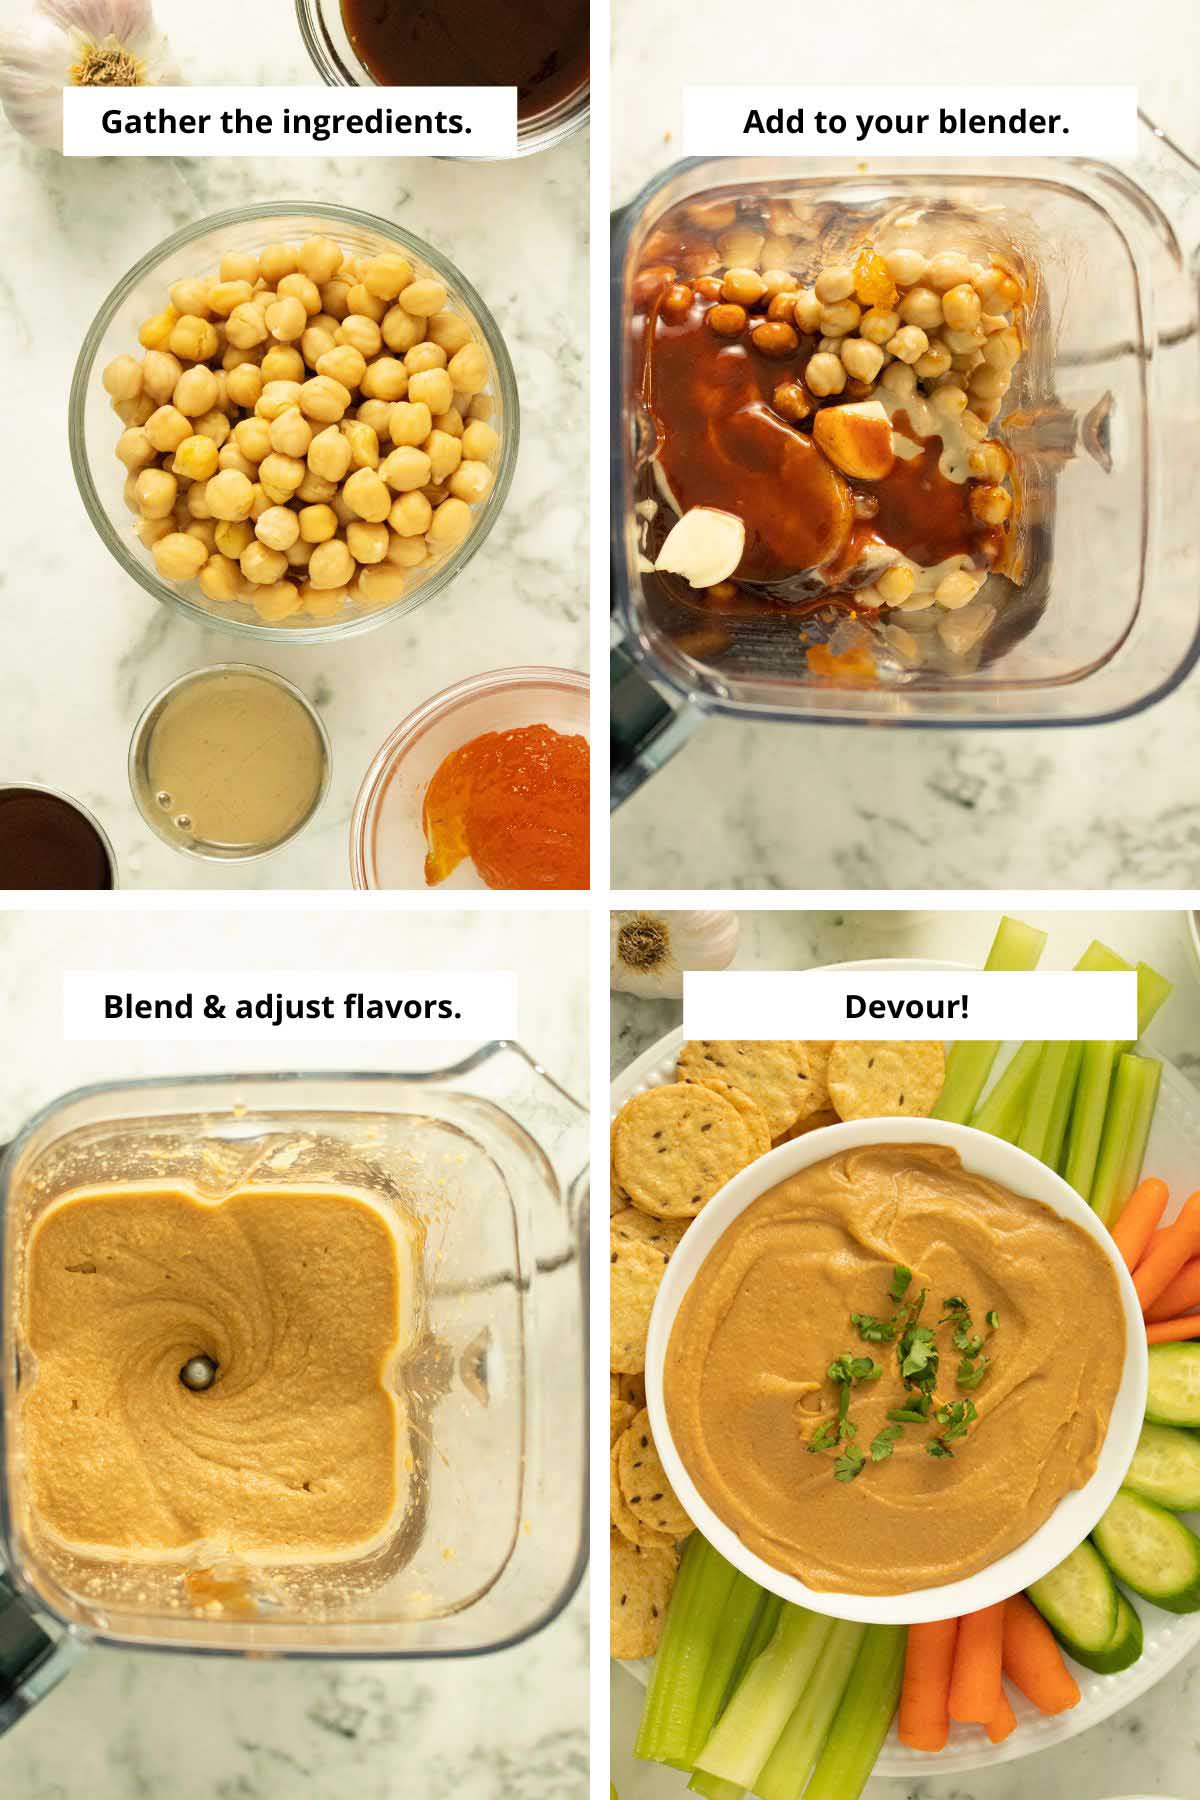 process collage showing hummus ingredients on a table, in the blender before and after blending, and the finished hummus in a serving bowl